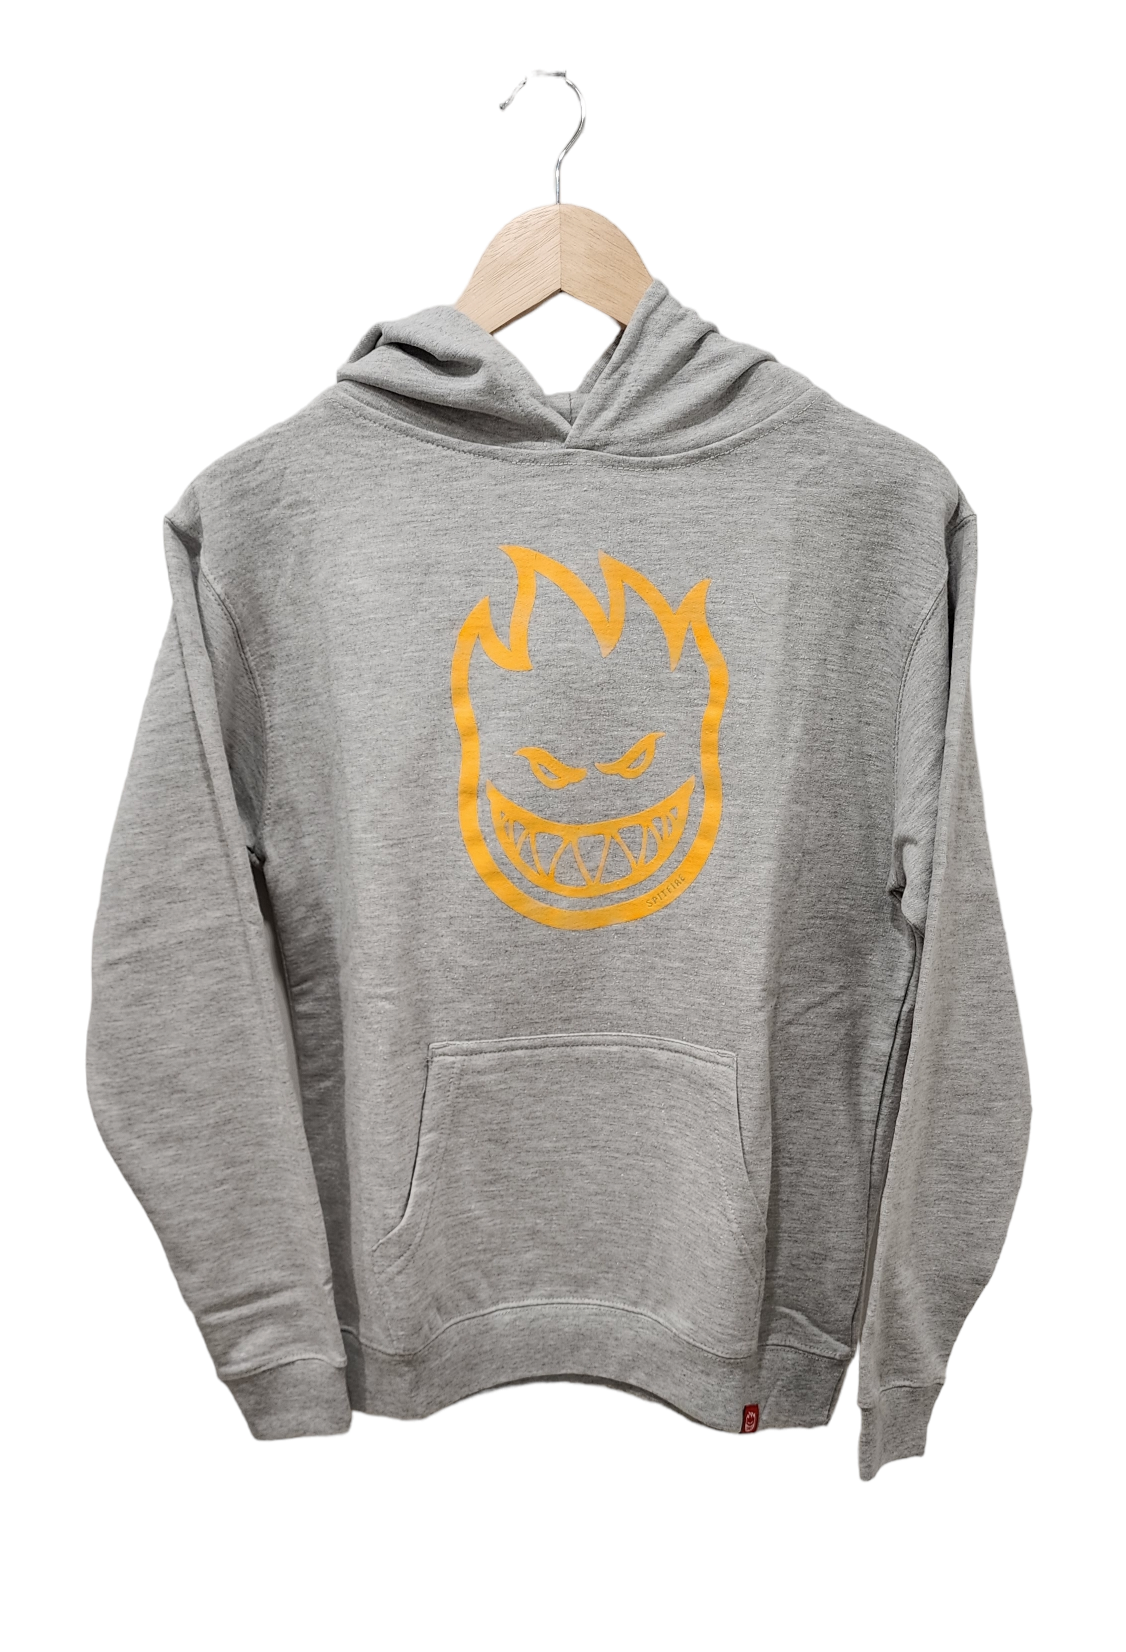 SPITFIRE BIGHEAD YOUTH PULL OVER HOODED SWEATSHIRT HOODIE GREY HEATHER WITH GOLD PRINT